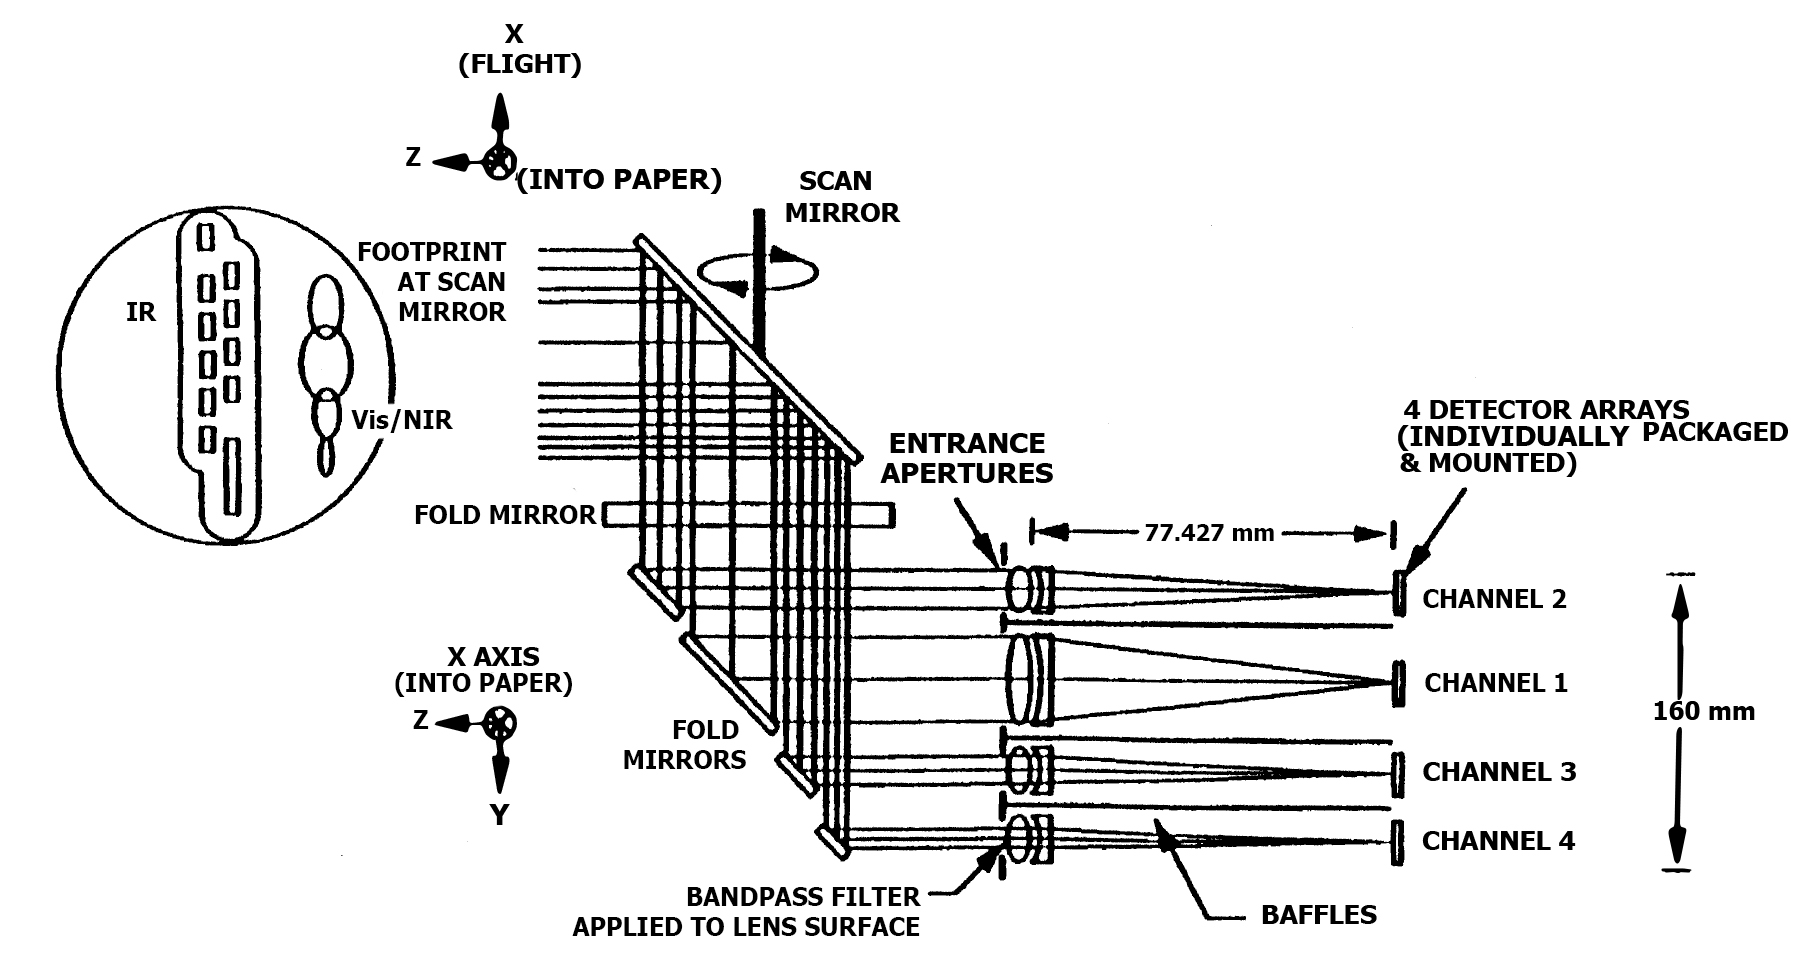 schematic drawing of the AIRS Vis/NIR optical system